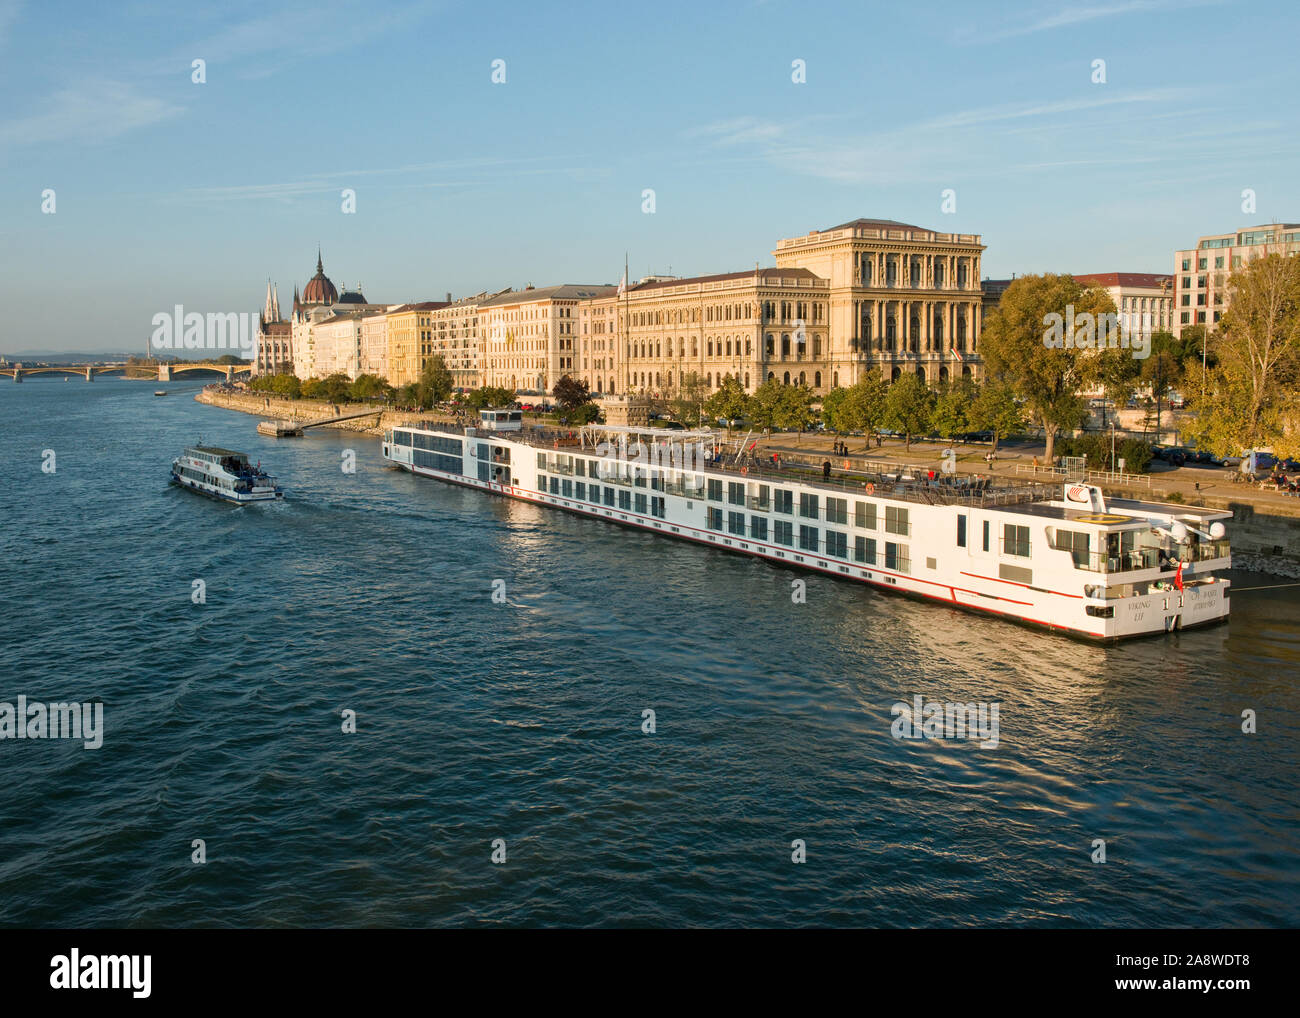 River Danube, Hungarian Academy of Sciences building and large river cruise boat. Pest, Budapest Stock Photo